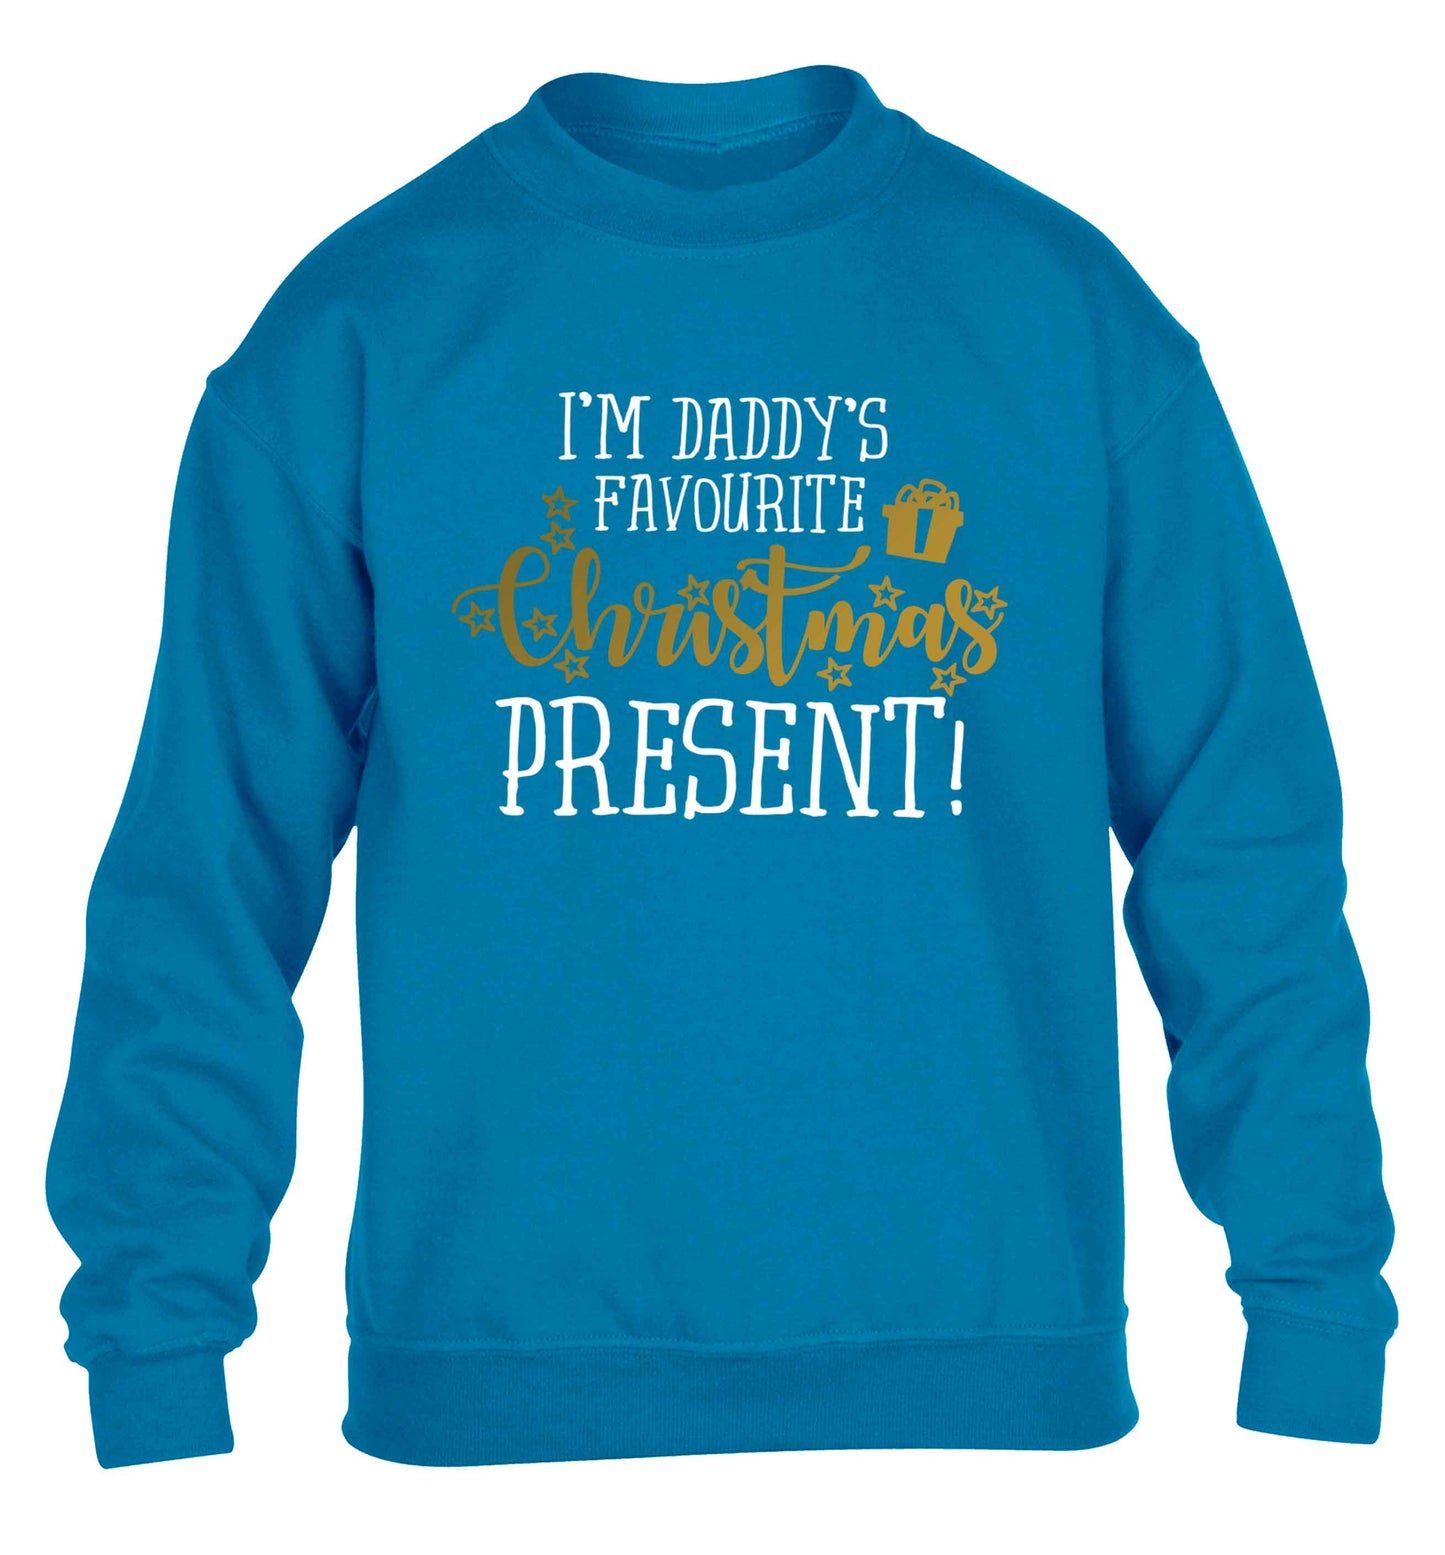 Daddy's favourite Christmas present children's blue sweater 12-13 Years